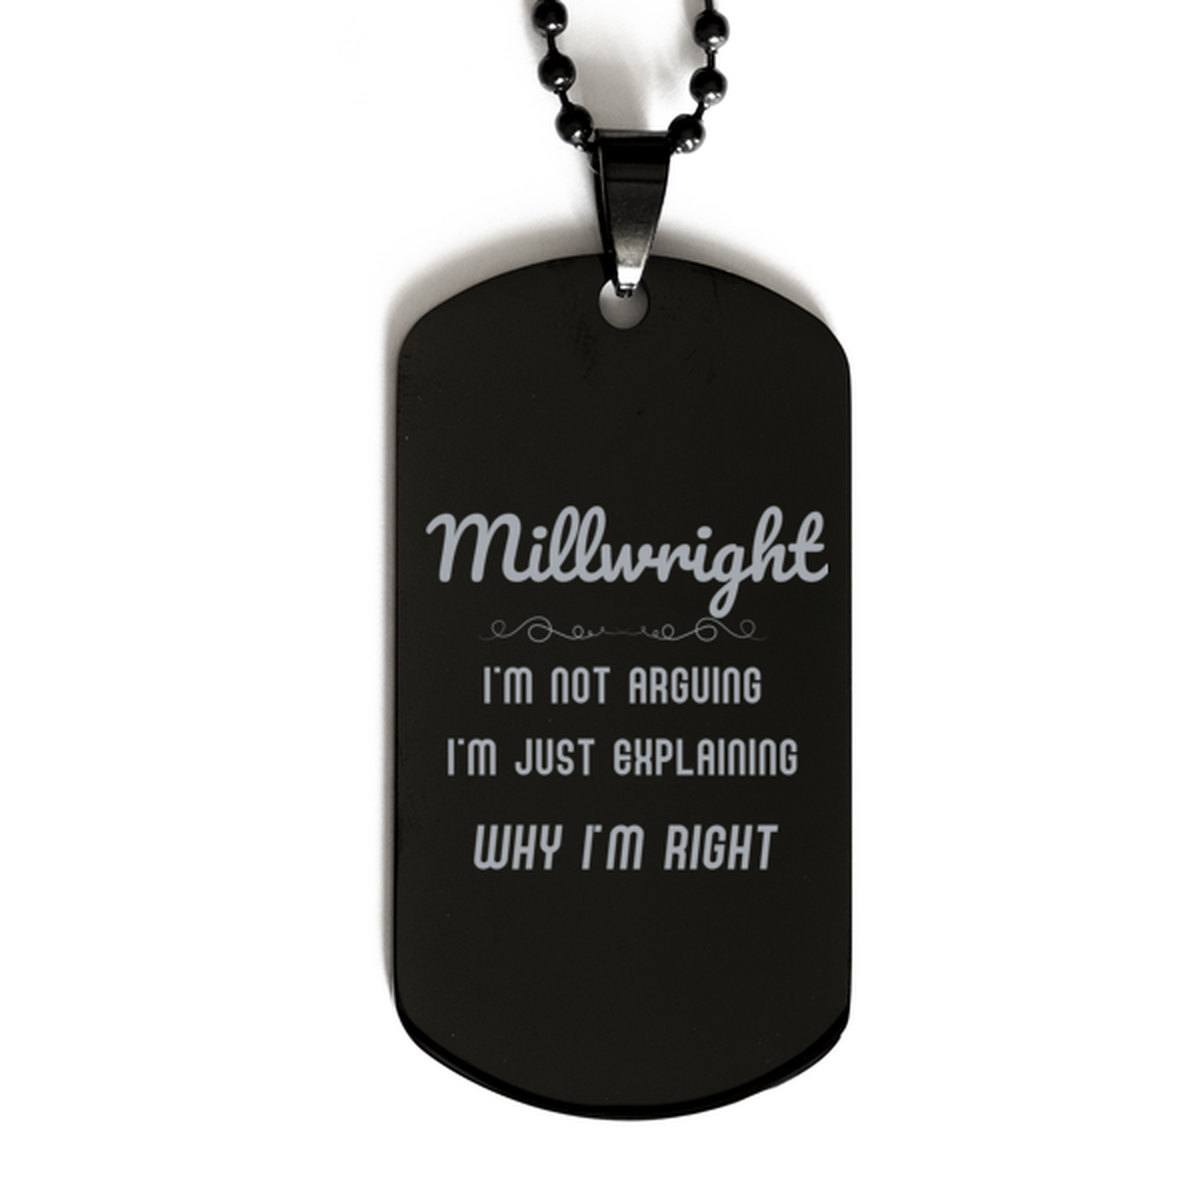 Millwright I'm not Arguing. I'm Just Explaining Why I'm RIGHT Black Dog Tag, Funny Saying Quote Millwright Gifts For Millwright Graduation Birthday Christmas Gifts for Men Women Coworker